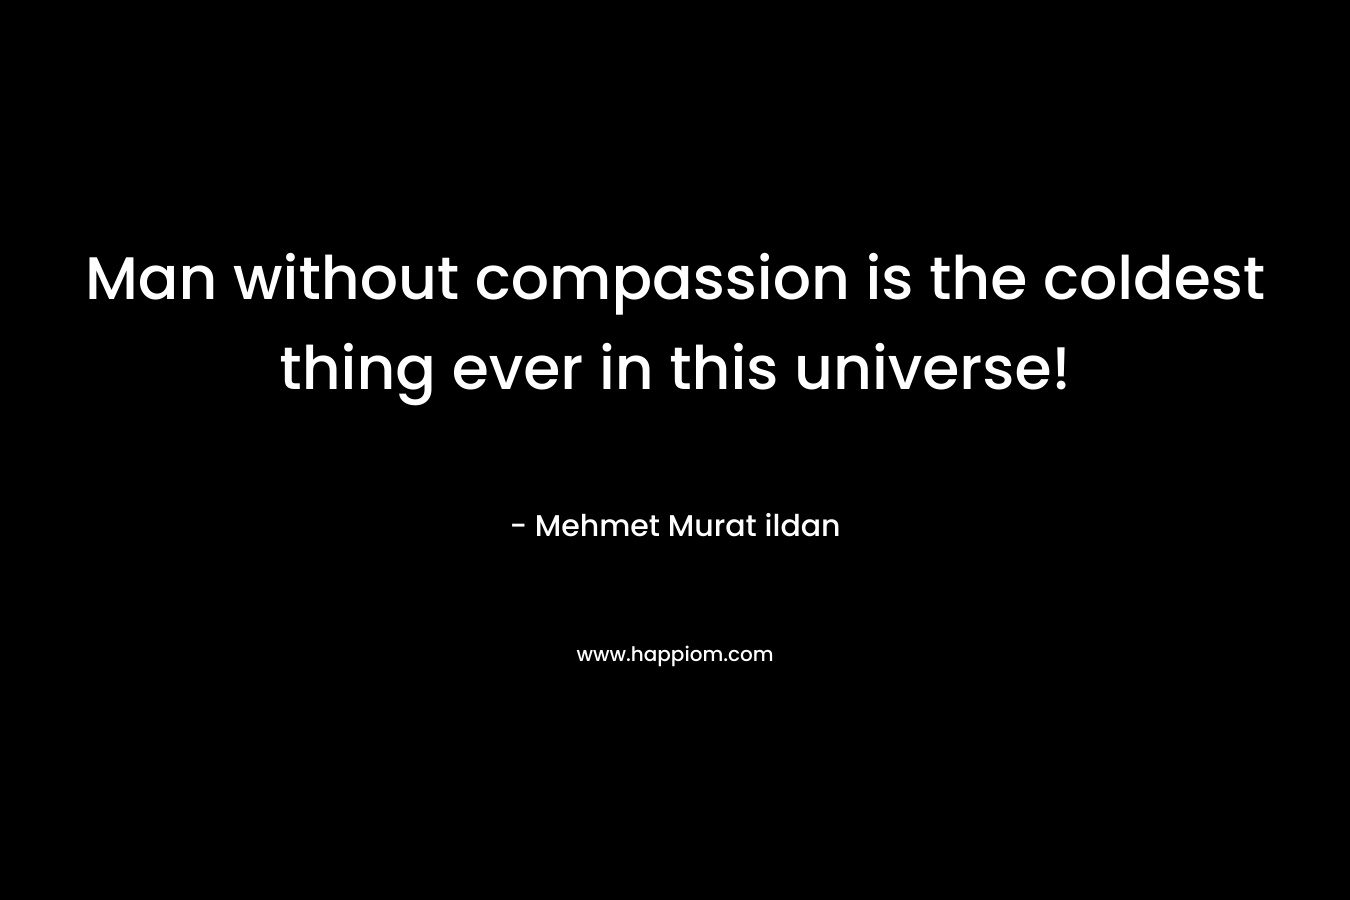 Man without compassion is the coldest thing ever in this universe!